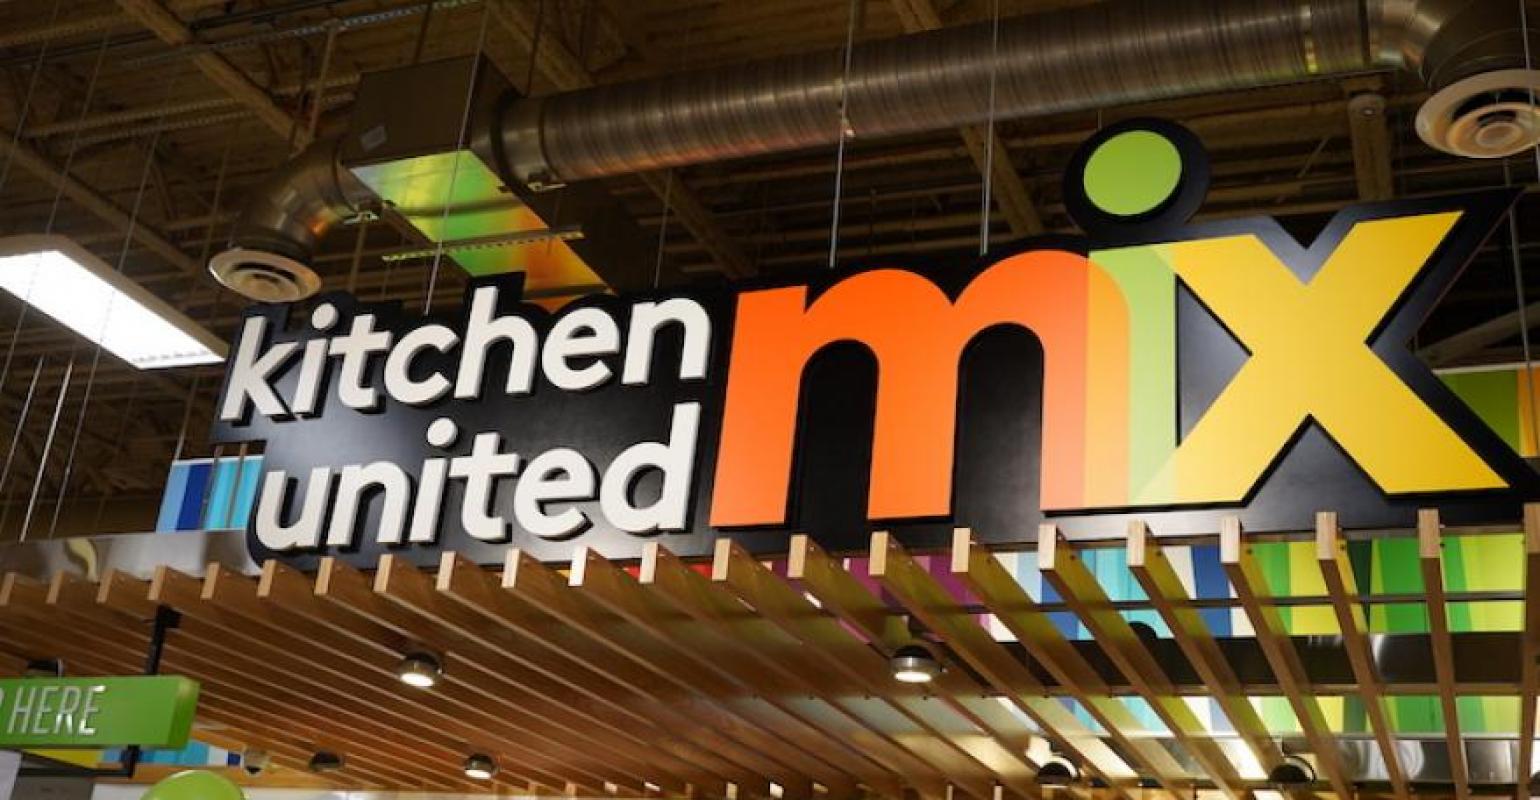 Kitchen United, Westfield to bring ghost kitchen tech to the mall